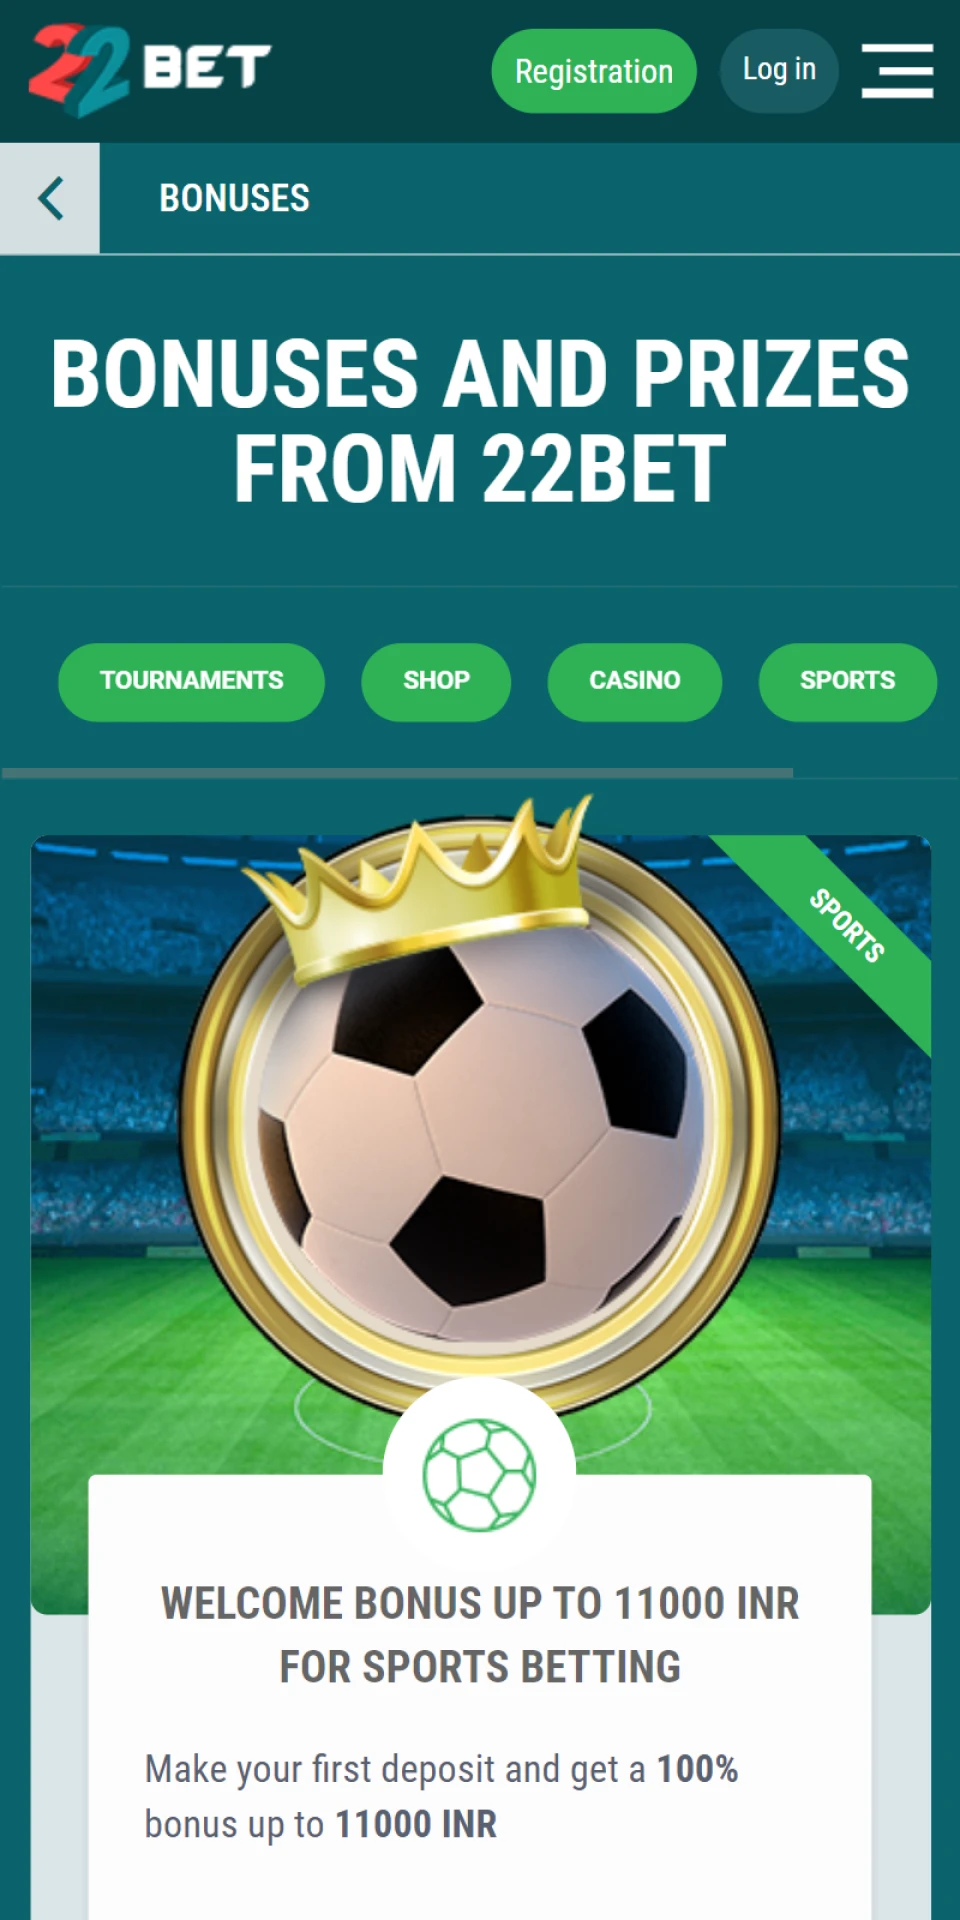 The 22bet mobile app offers many bonuses.